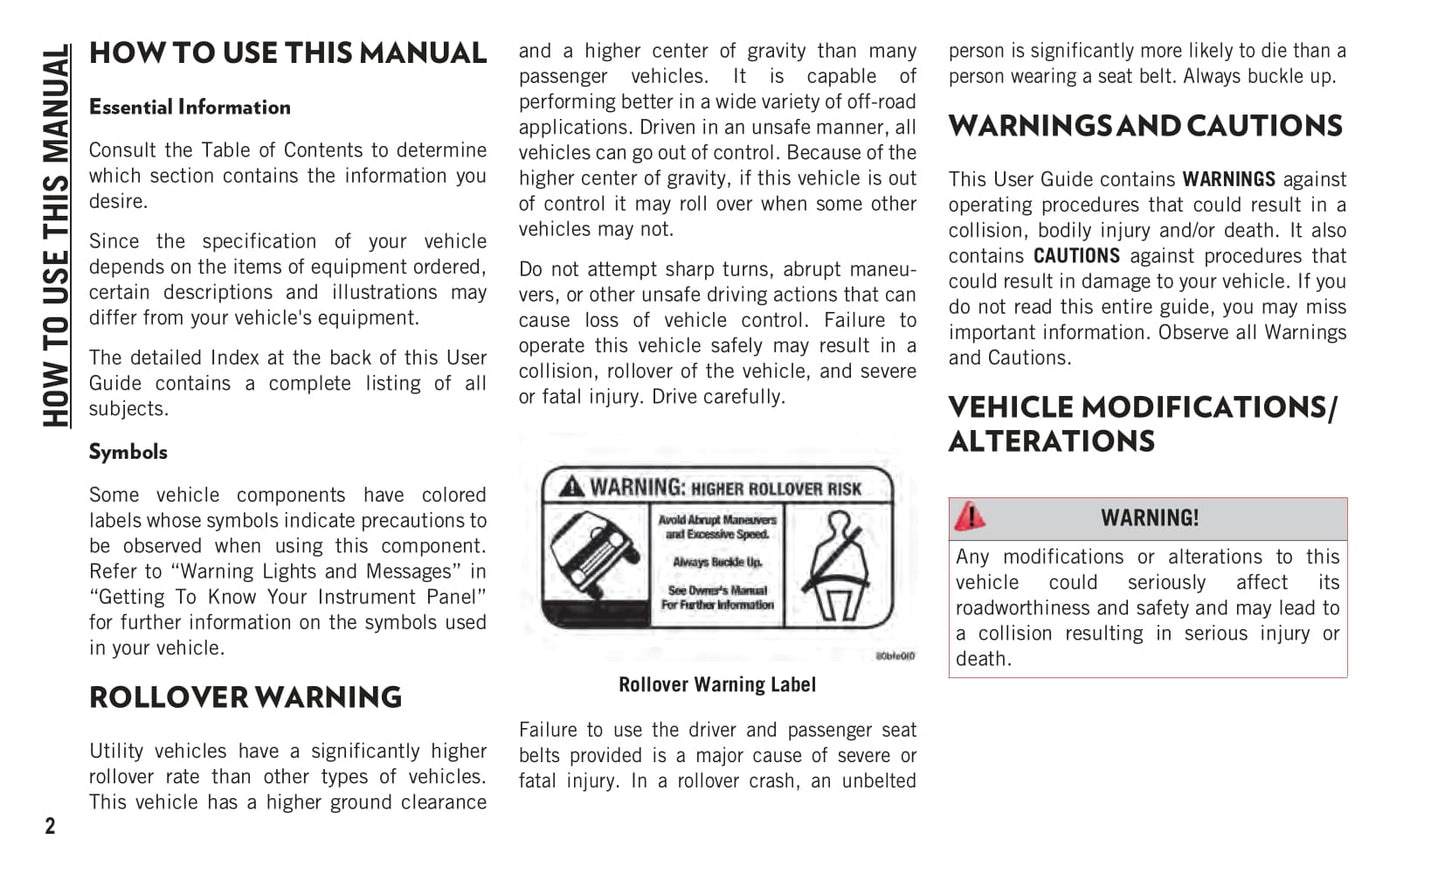 2019-2020 Jeep Wrangler Owner's Manual | English